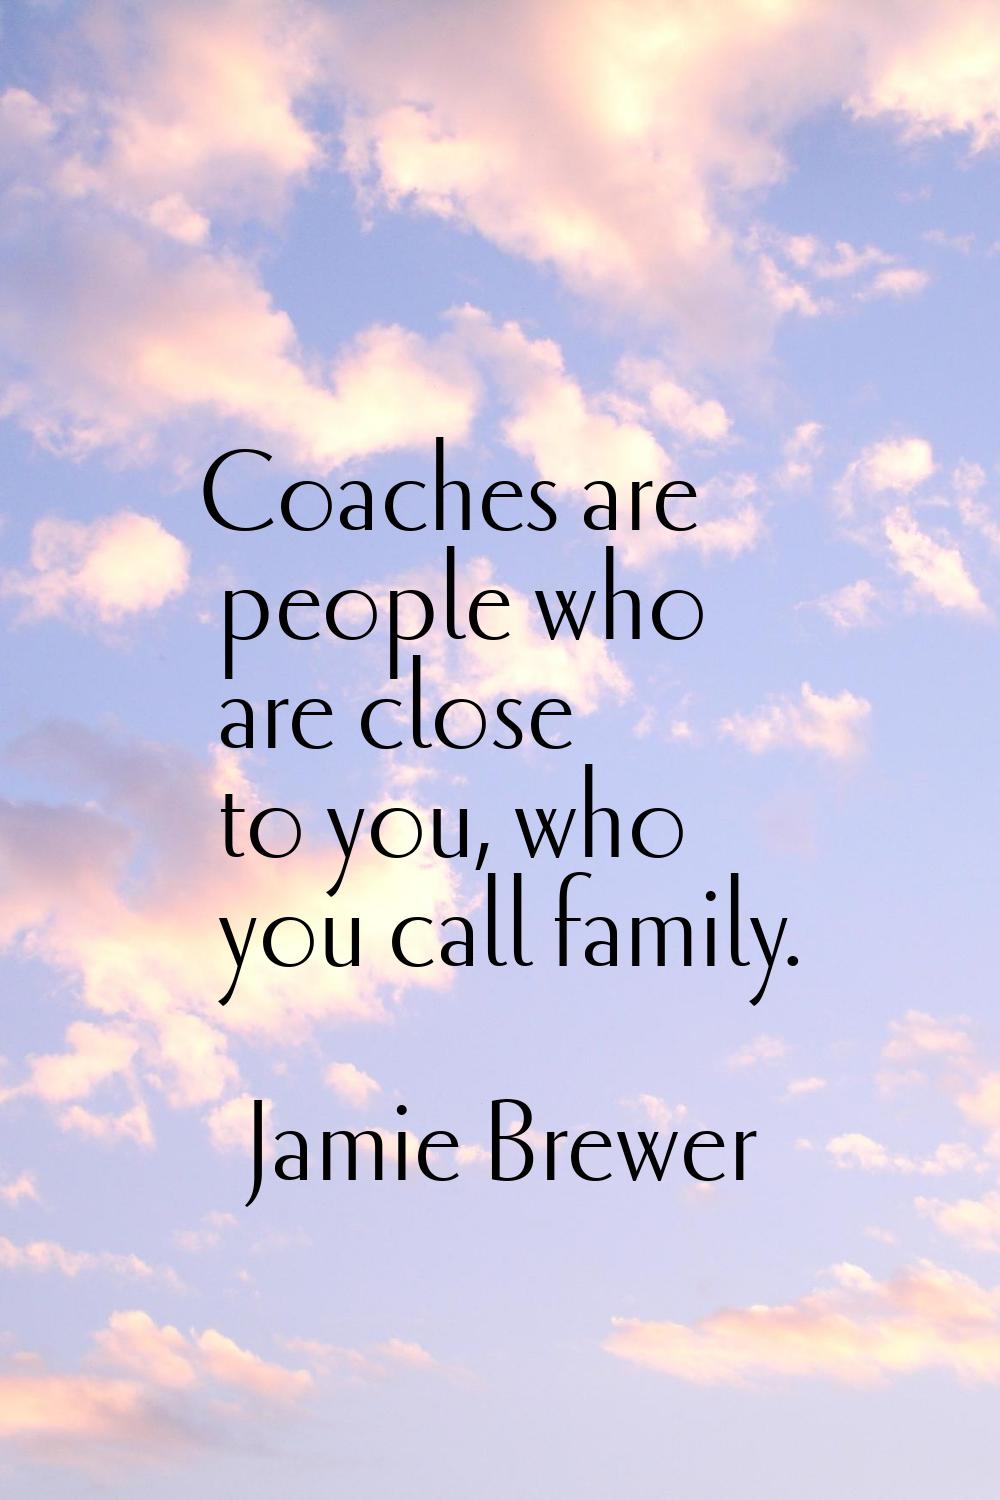 Coaches are people who are close to you, who you call family.